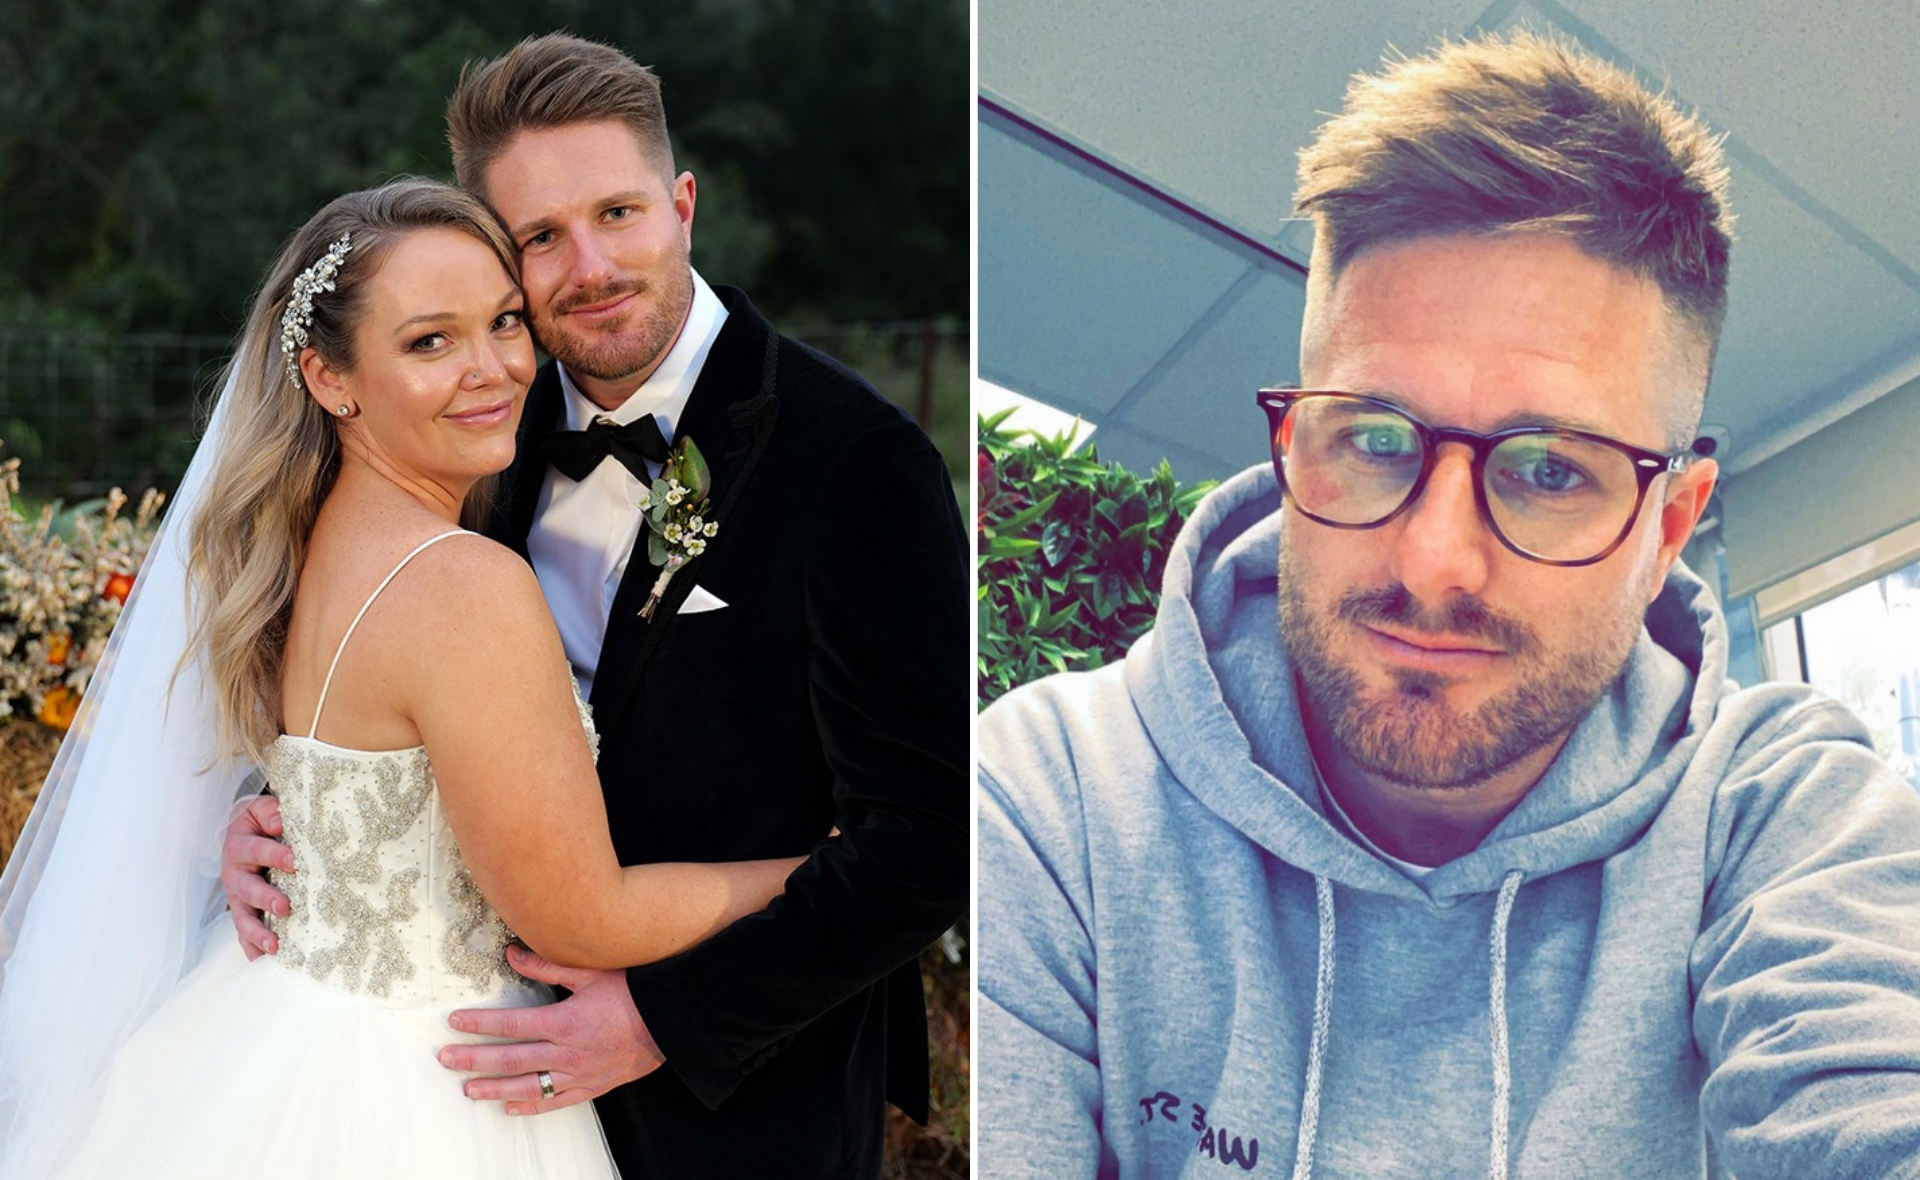 “A lot of things happened behind the scenes”: Married At First Sight’s Bryce Ruthven spills on his ex-fiancée